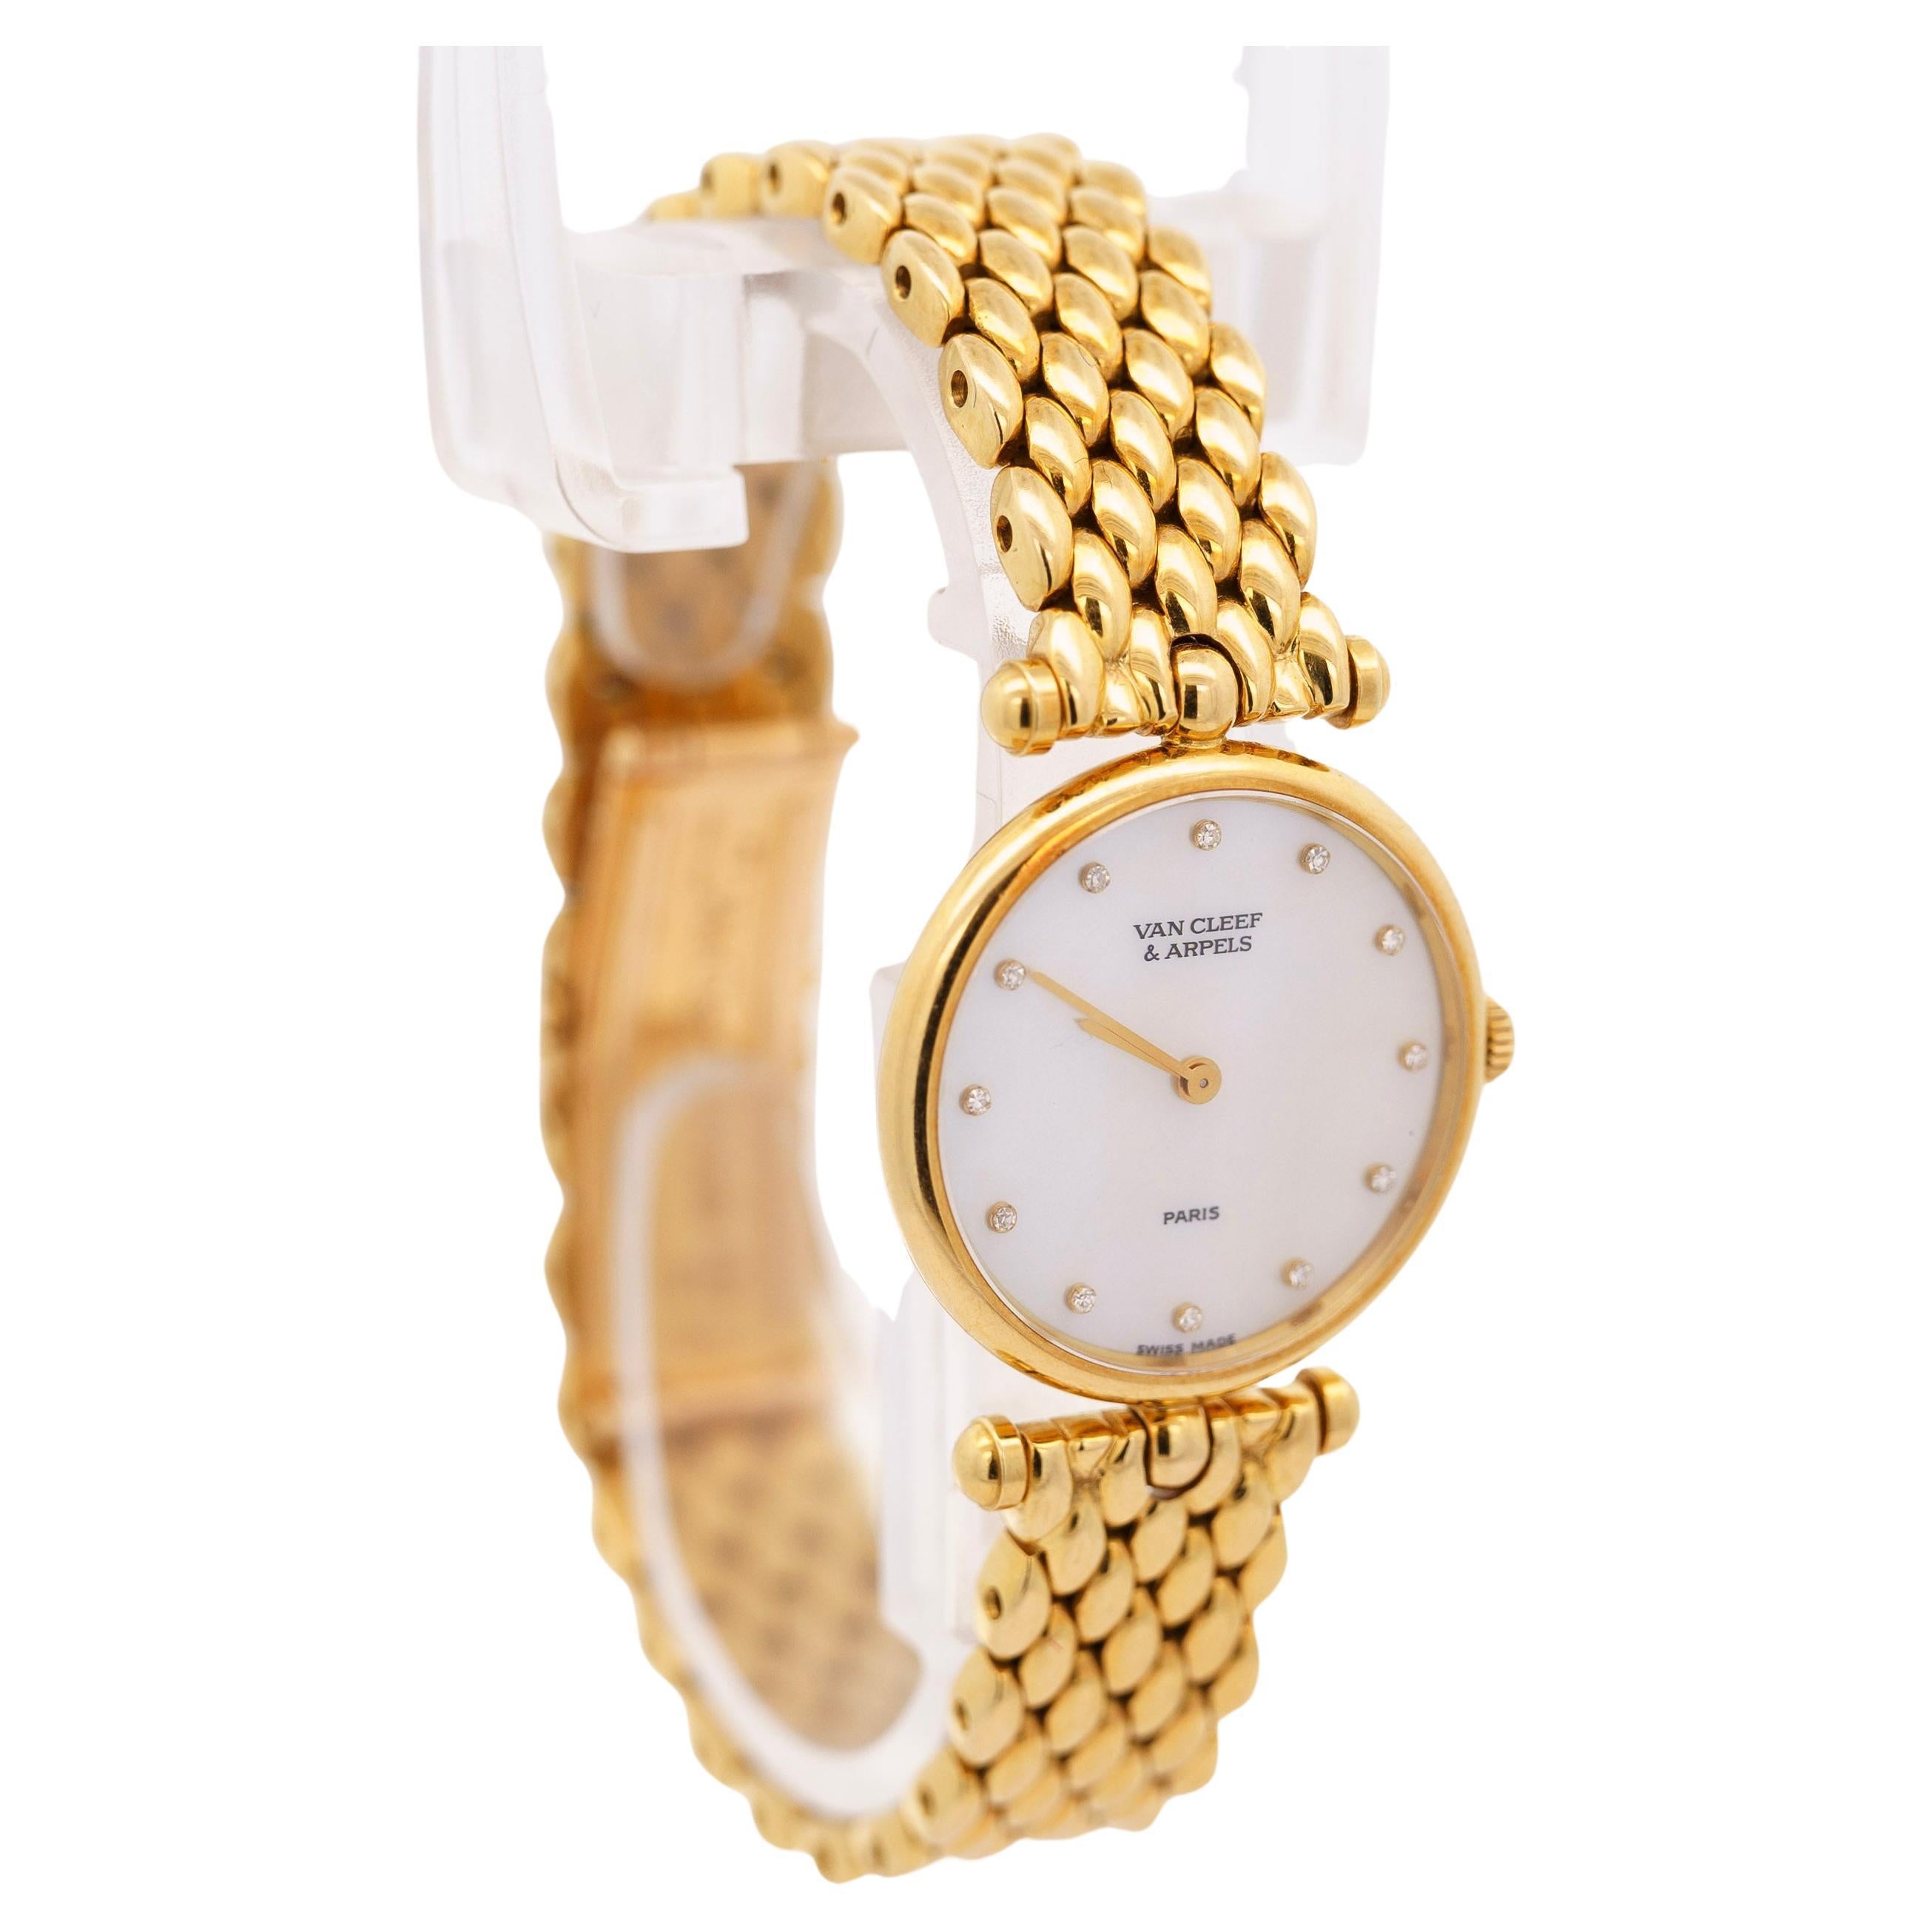 Vintage Van Cleef and Arpels Solid Gold Mother of Pearl and Diamonds Ladies Watch. Made with all original parts and movement. Maintained in excellent condition.

18k solid gold Van Cleef and Arpels Ref. 18601 ladies' watch. Smooth bezel with factory